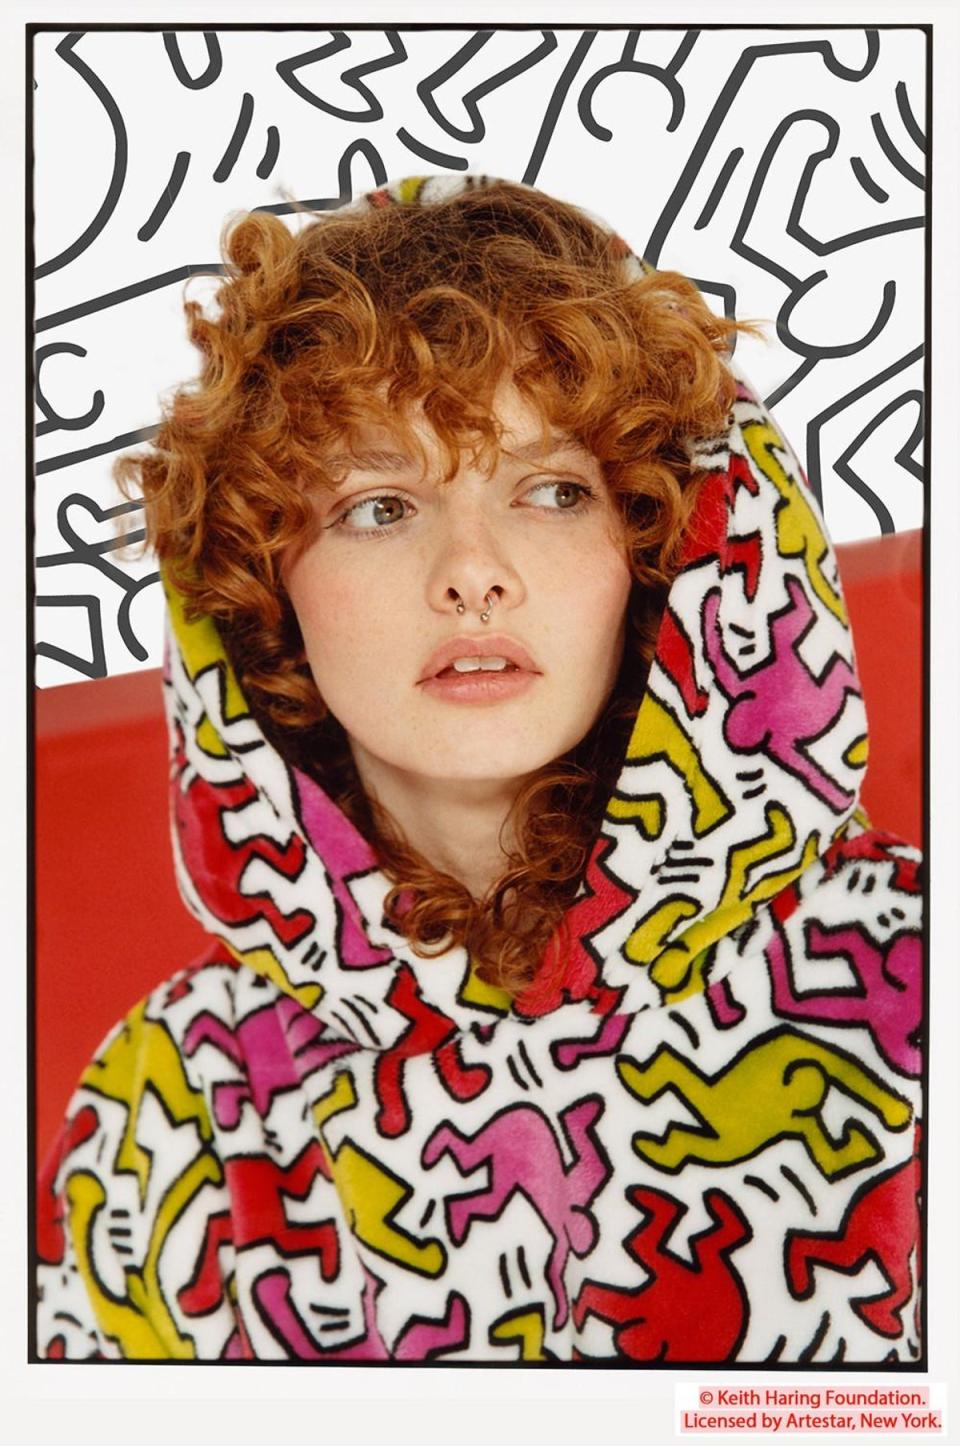 Primark has launched a Keith Haring collection. (Primark/Keith Haring Foundation licensed by Artestar)